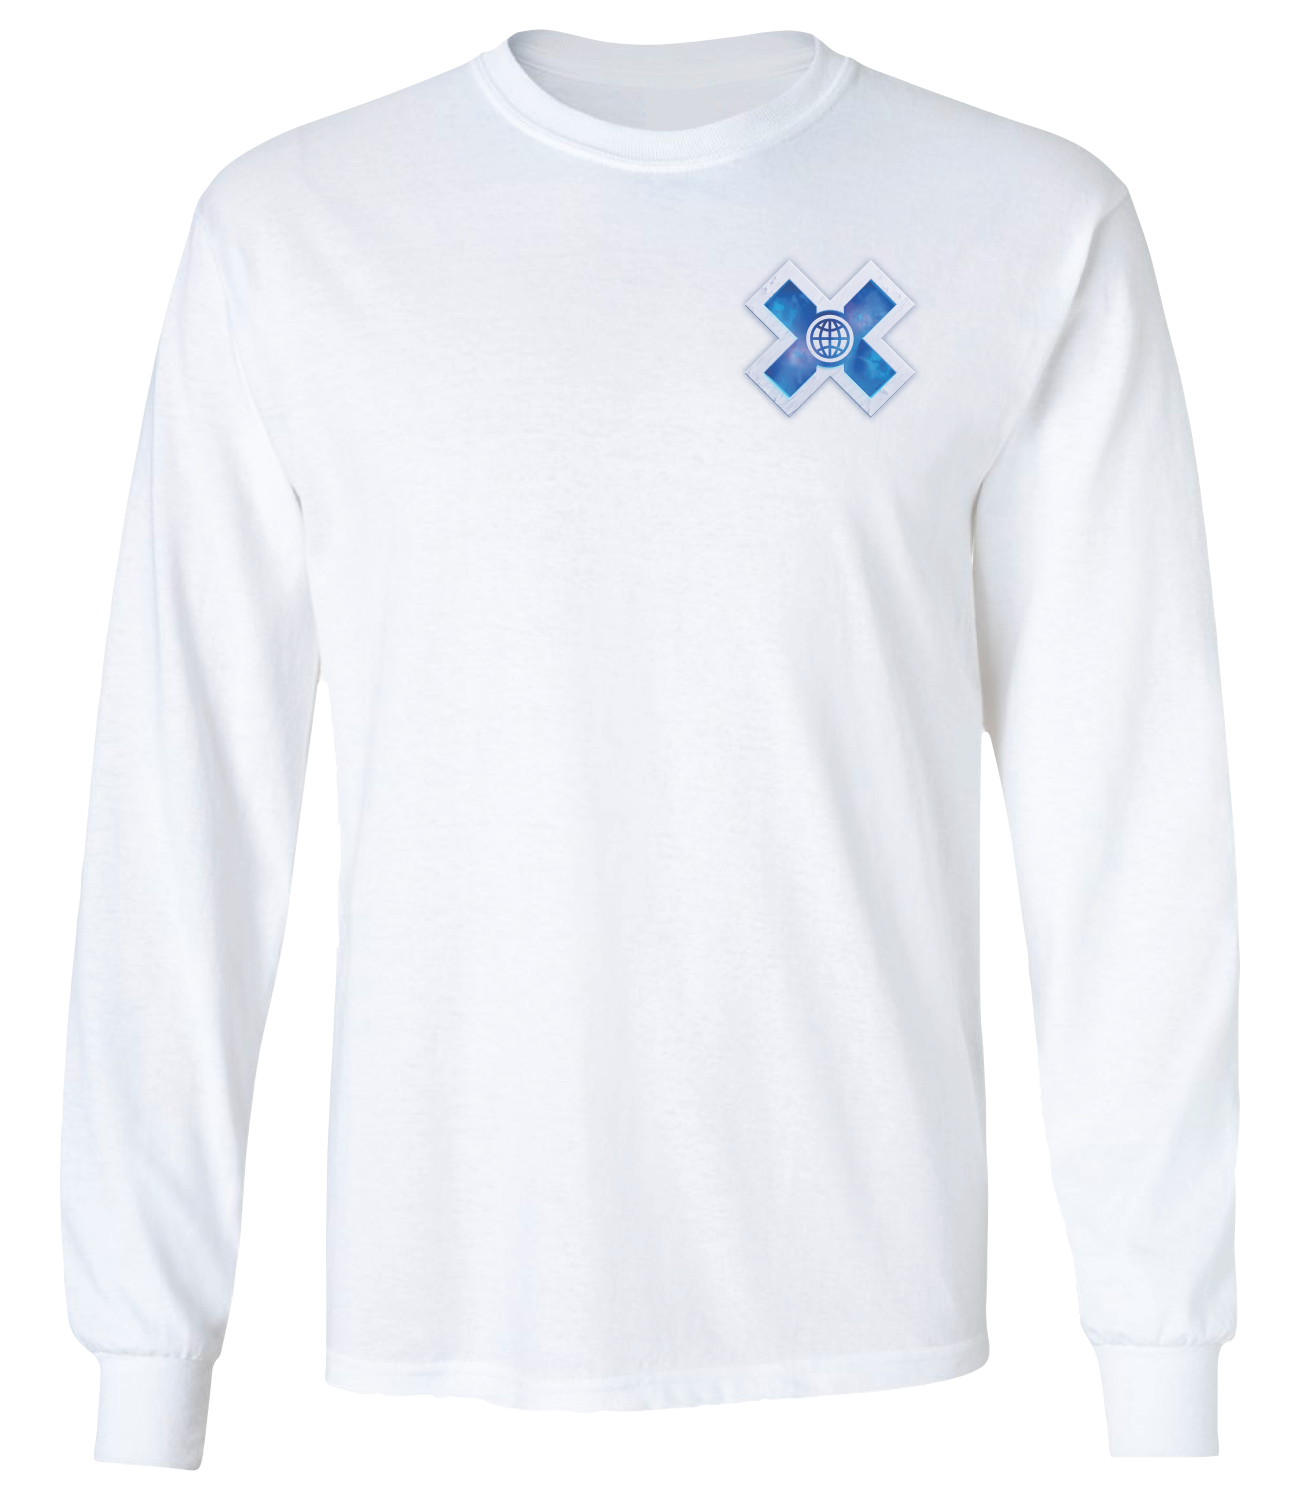 The '23 Campaign White Long Sleeve